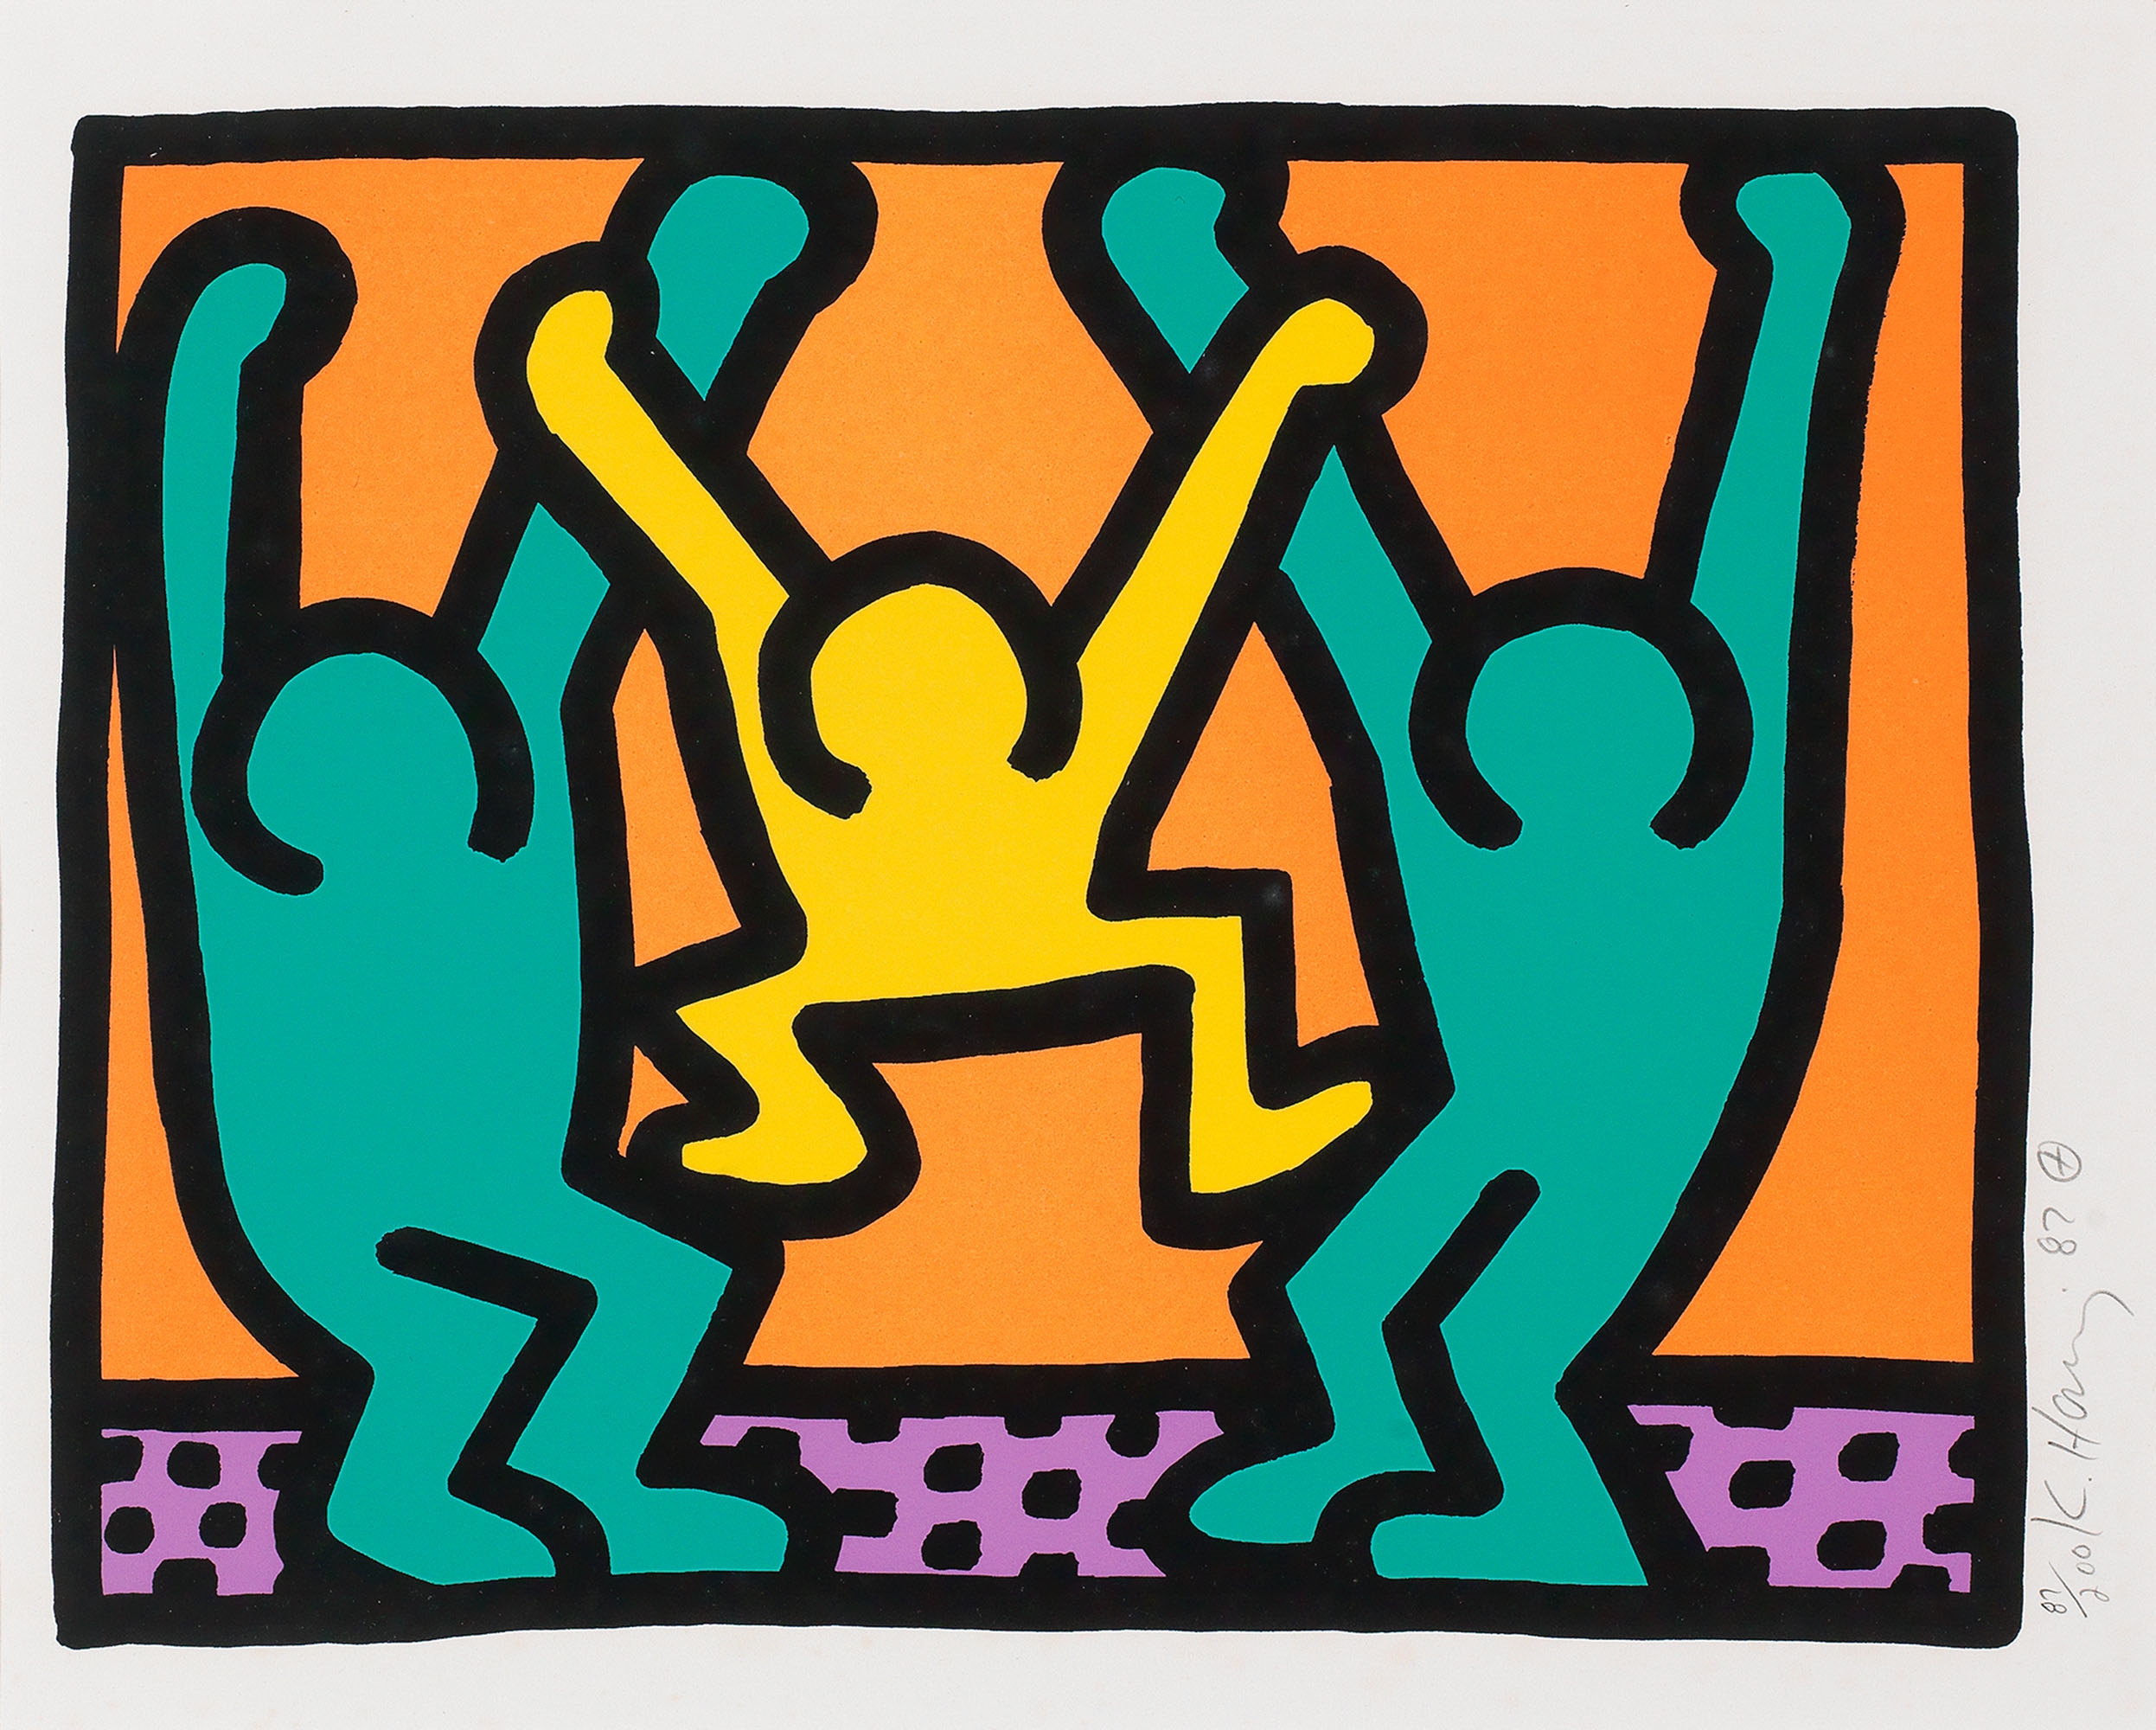 Artwork by Keith Haring, Pop Shop I: one plate, Made of screenprint.